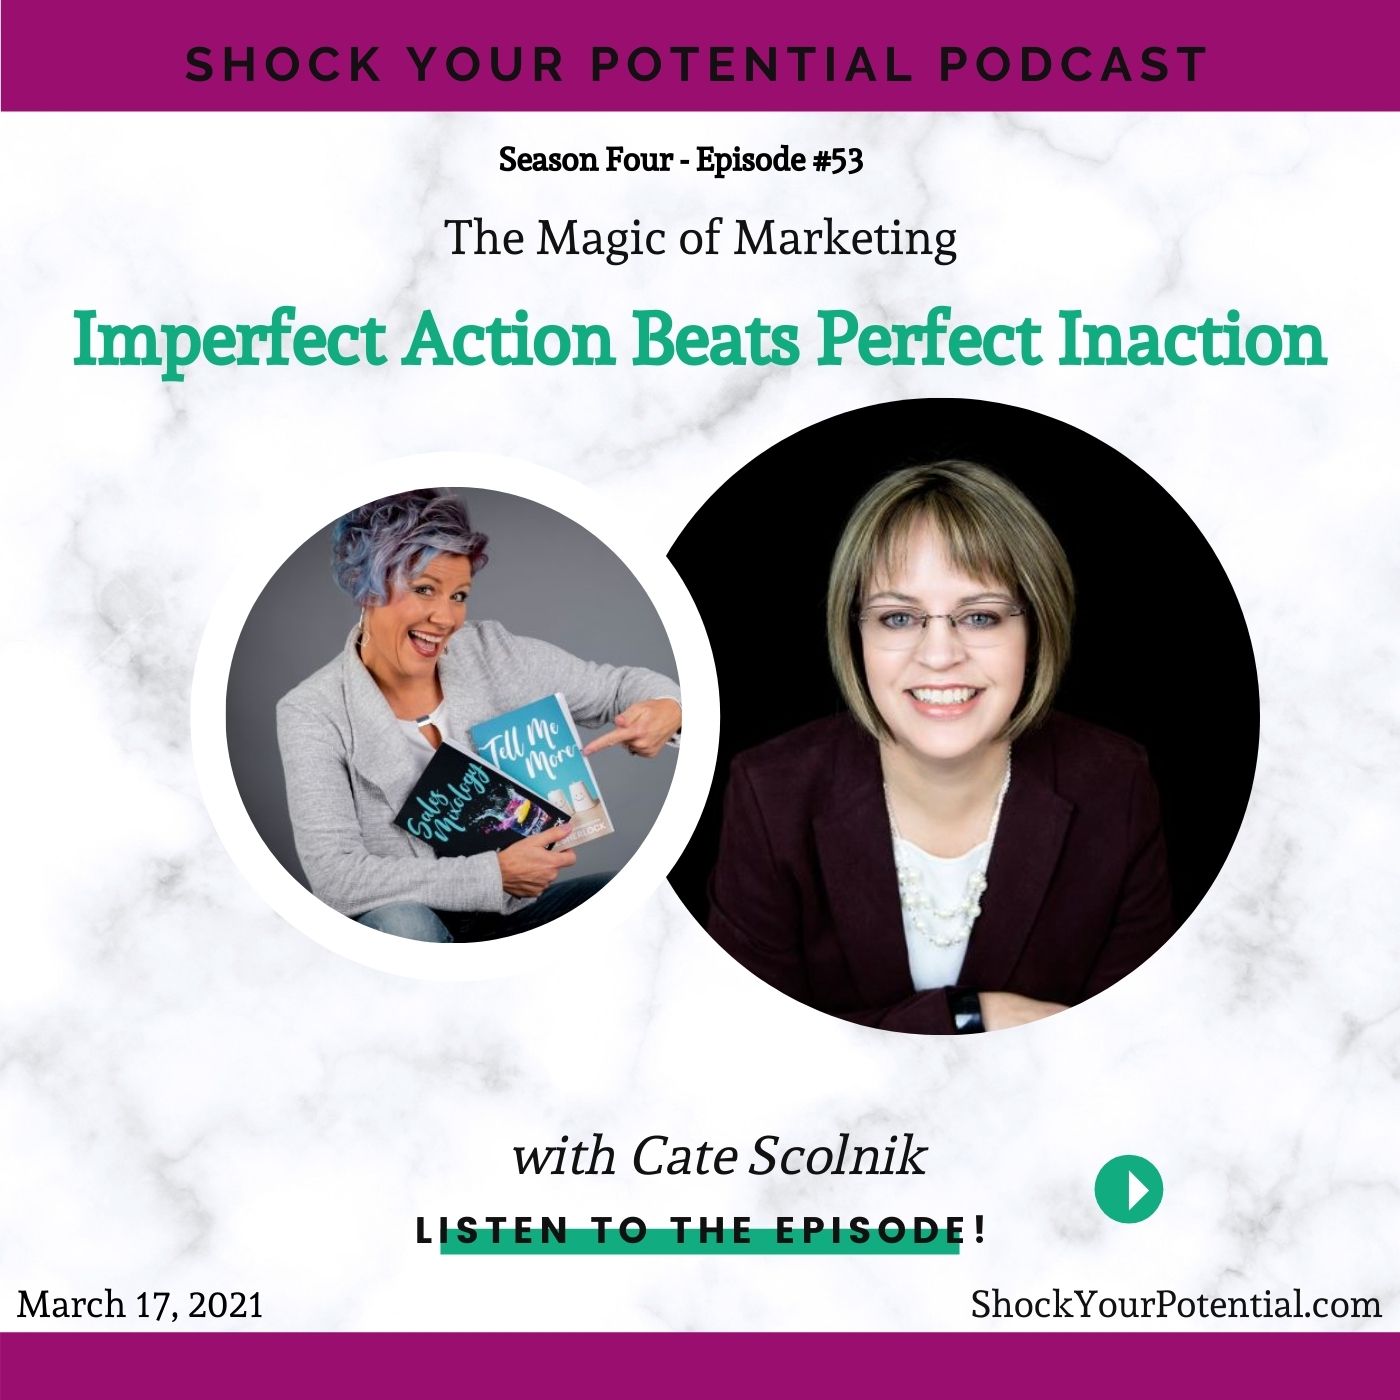 Imperfect Action Beats Perfect Inaction – Cate Scolnik